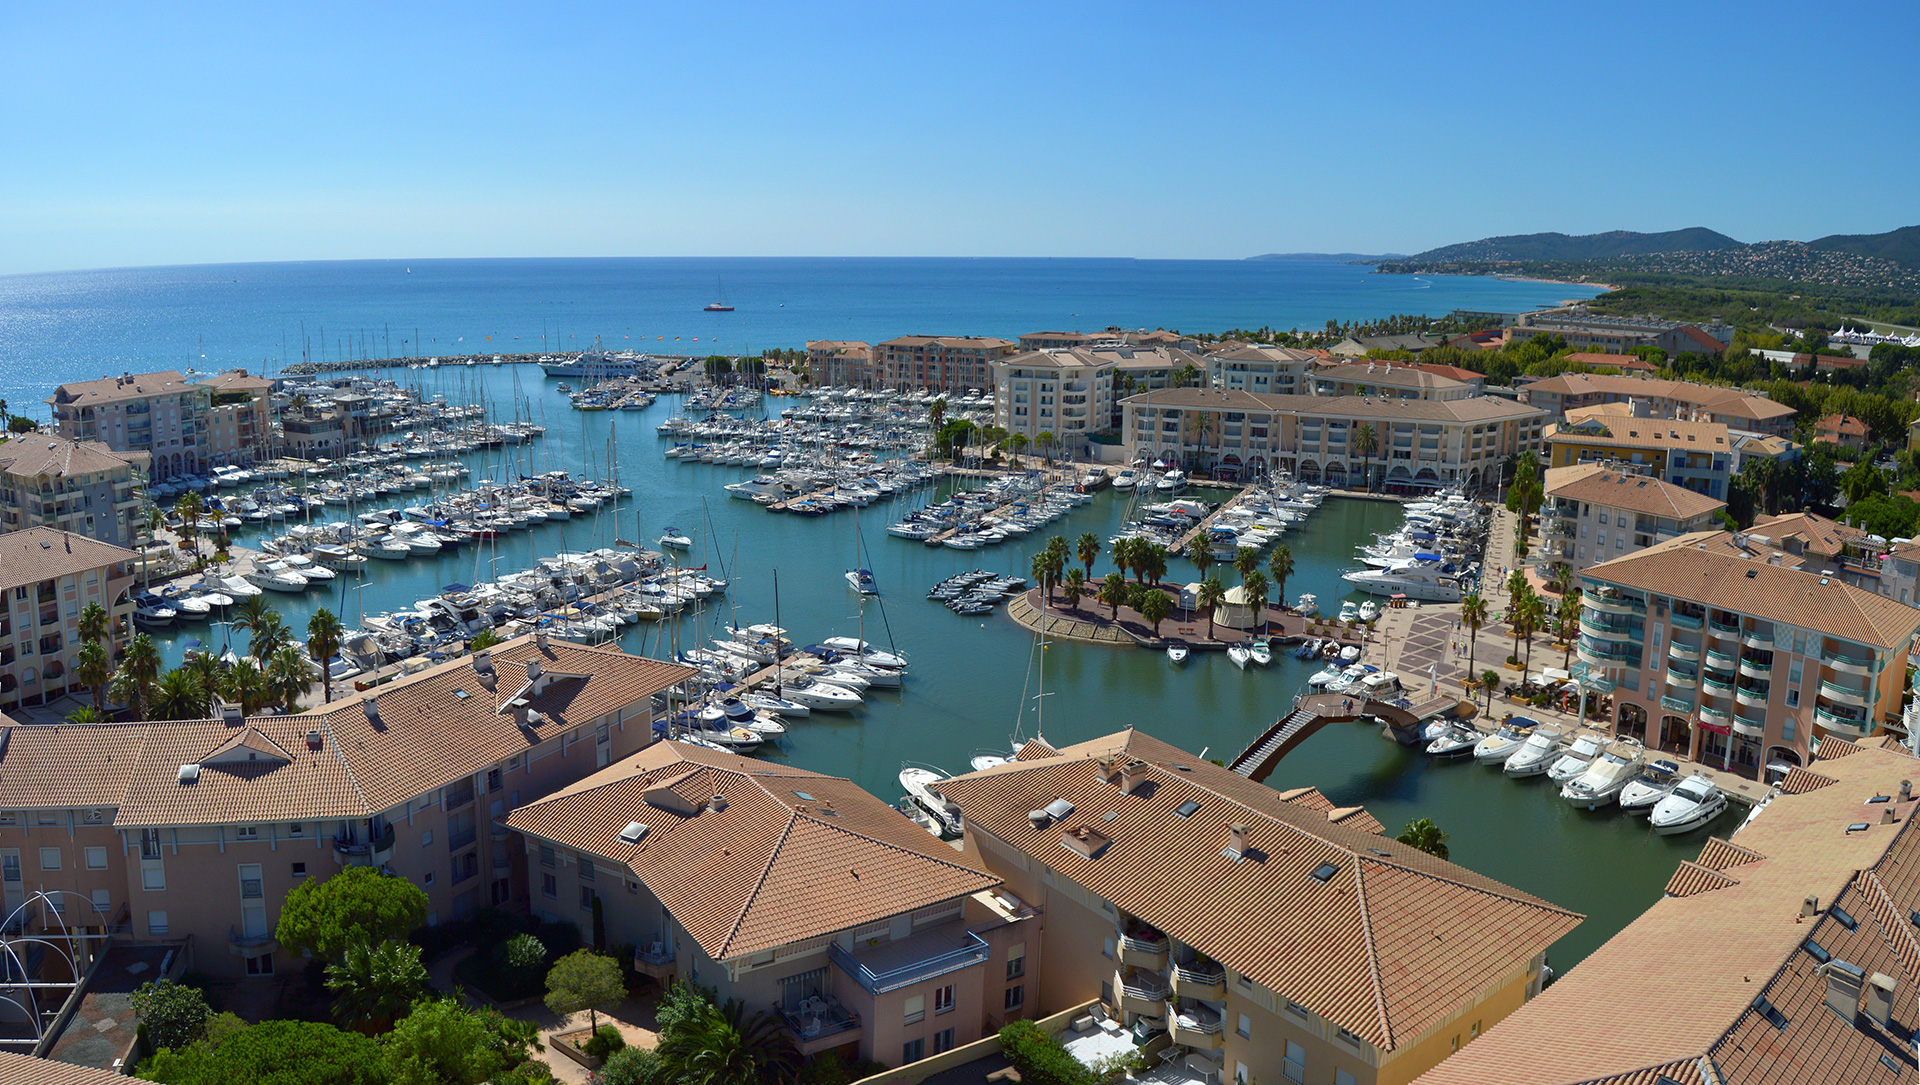 Port-Fréjus' seaport and boating services